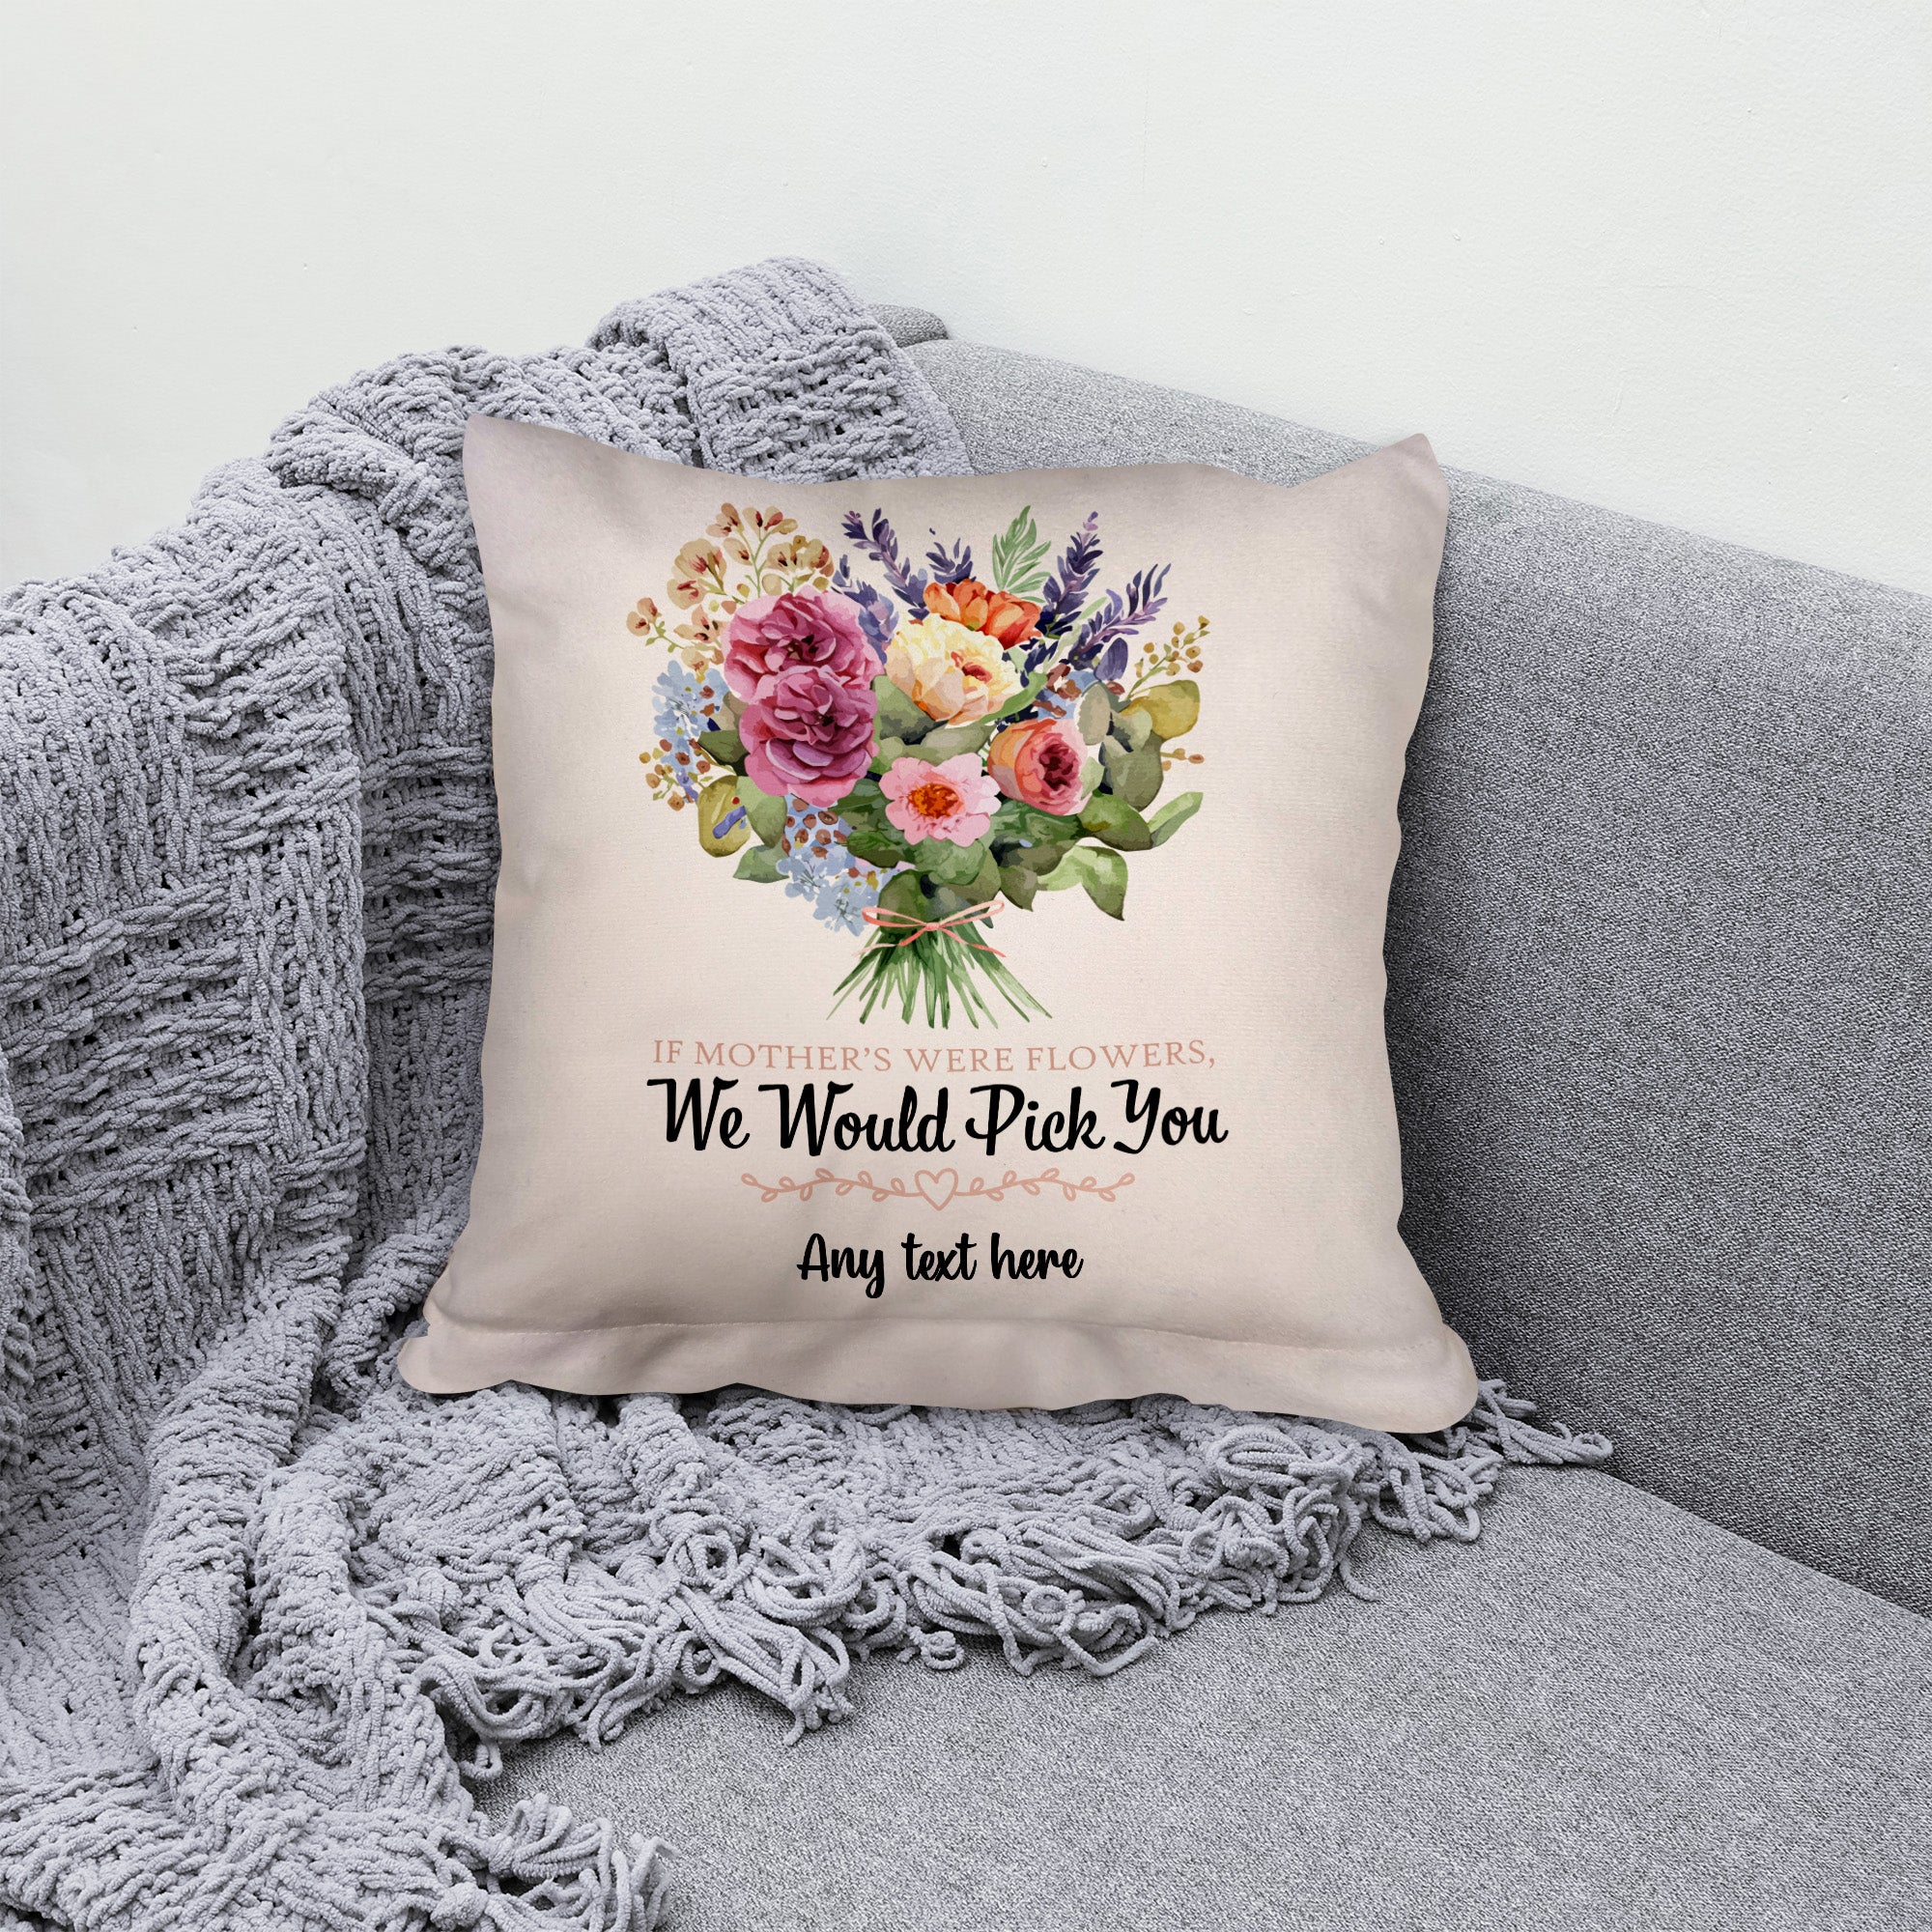 Flowers - I'd pick you - 26cm x 26cm - Personalised Cushion